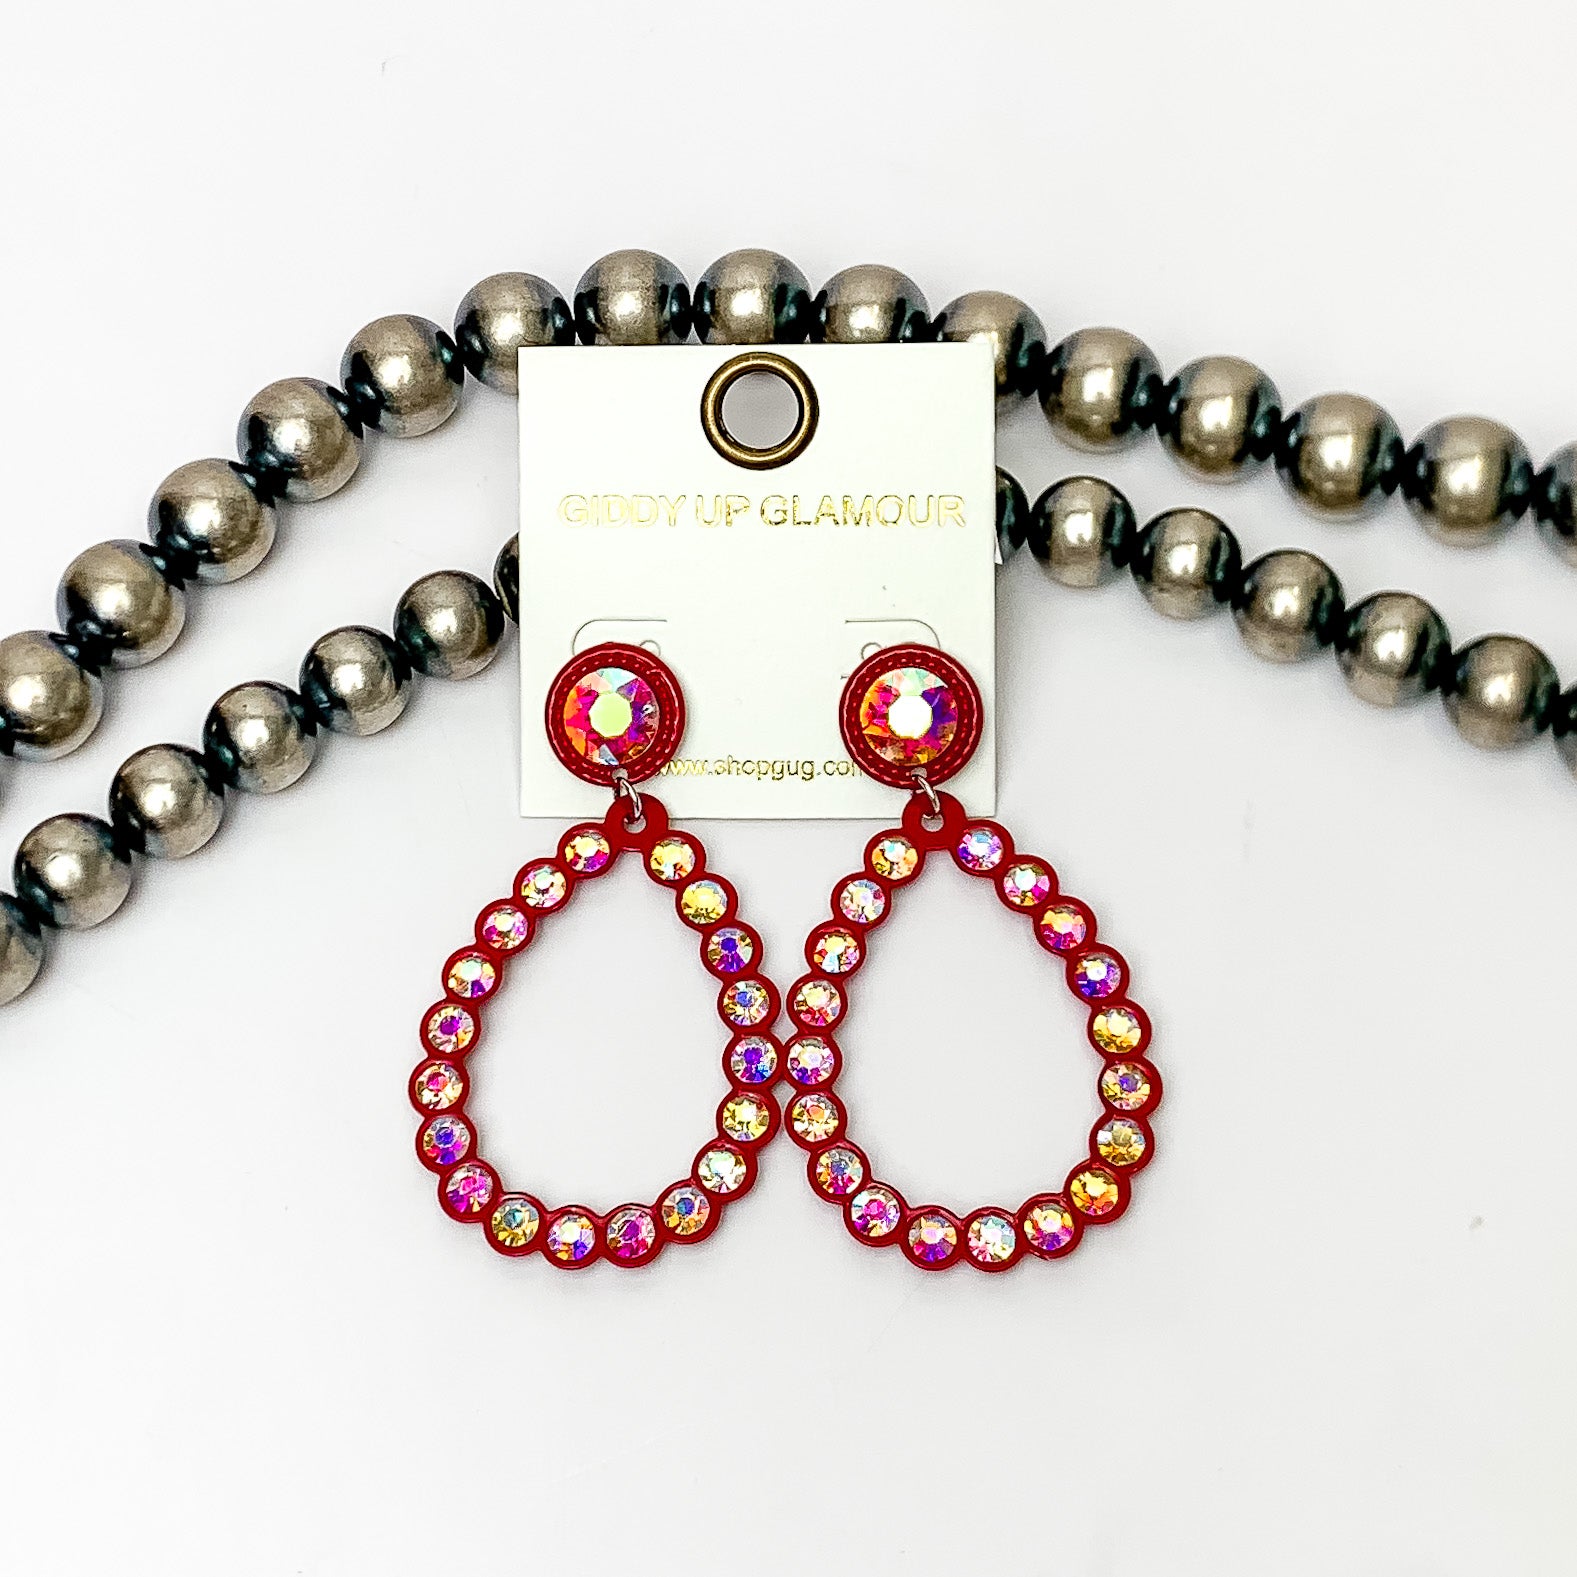 Glitzy Girl AB Crystal Teardrop Earrings in Red. Pictured on a white background with Navajo pearls behind the earrings.